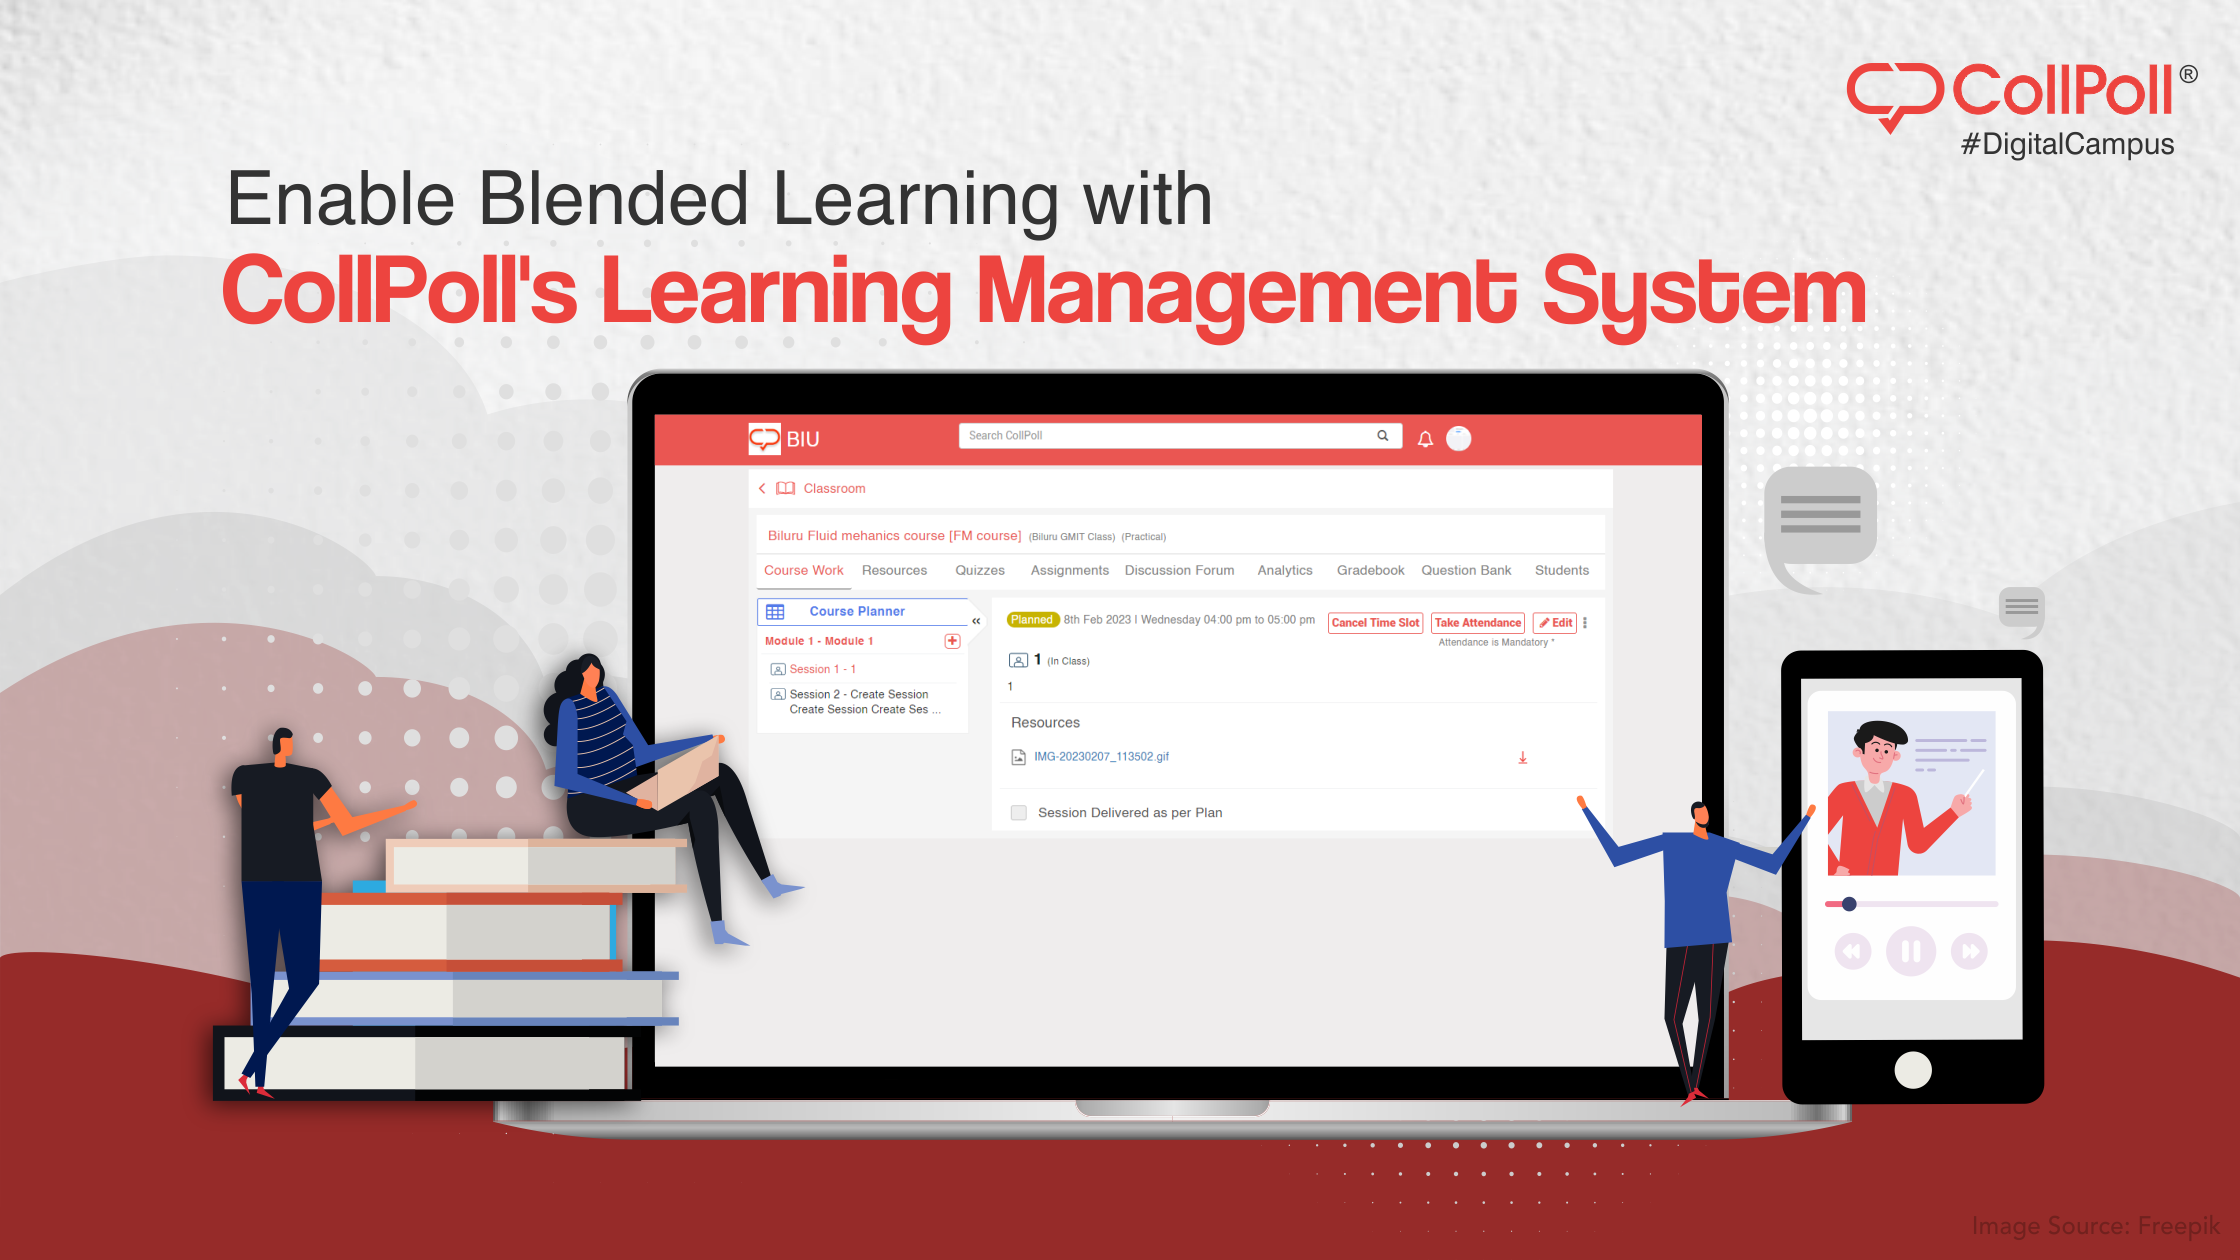 Enable Blended Learning with CollPoll's Learning Management System